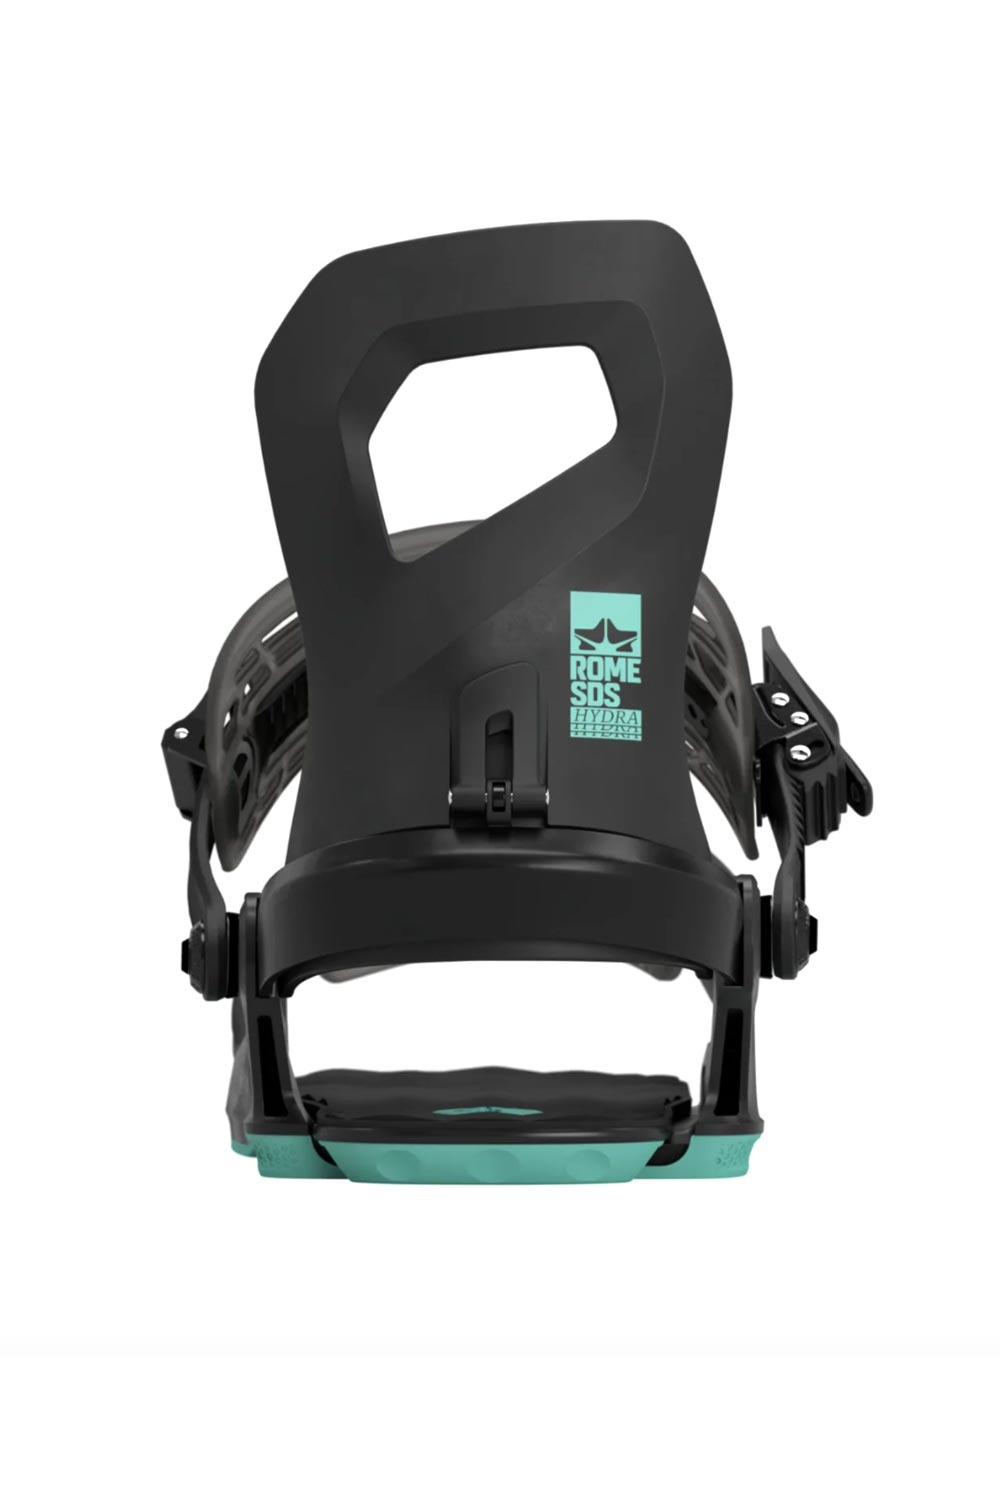 Women's Rome Hydra snowboard bindings, black with teal accents